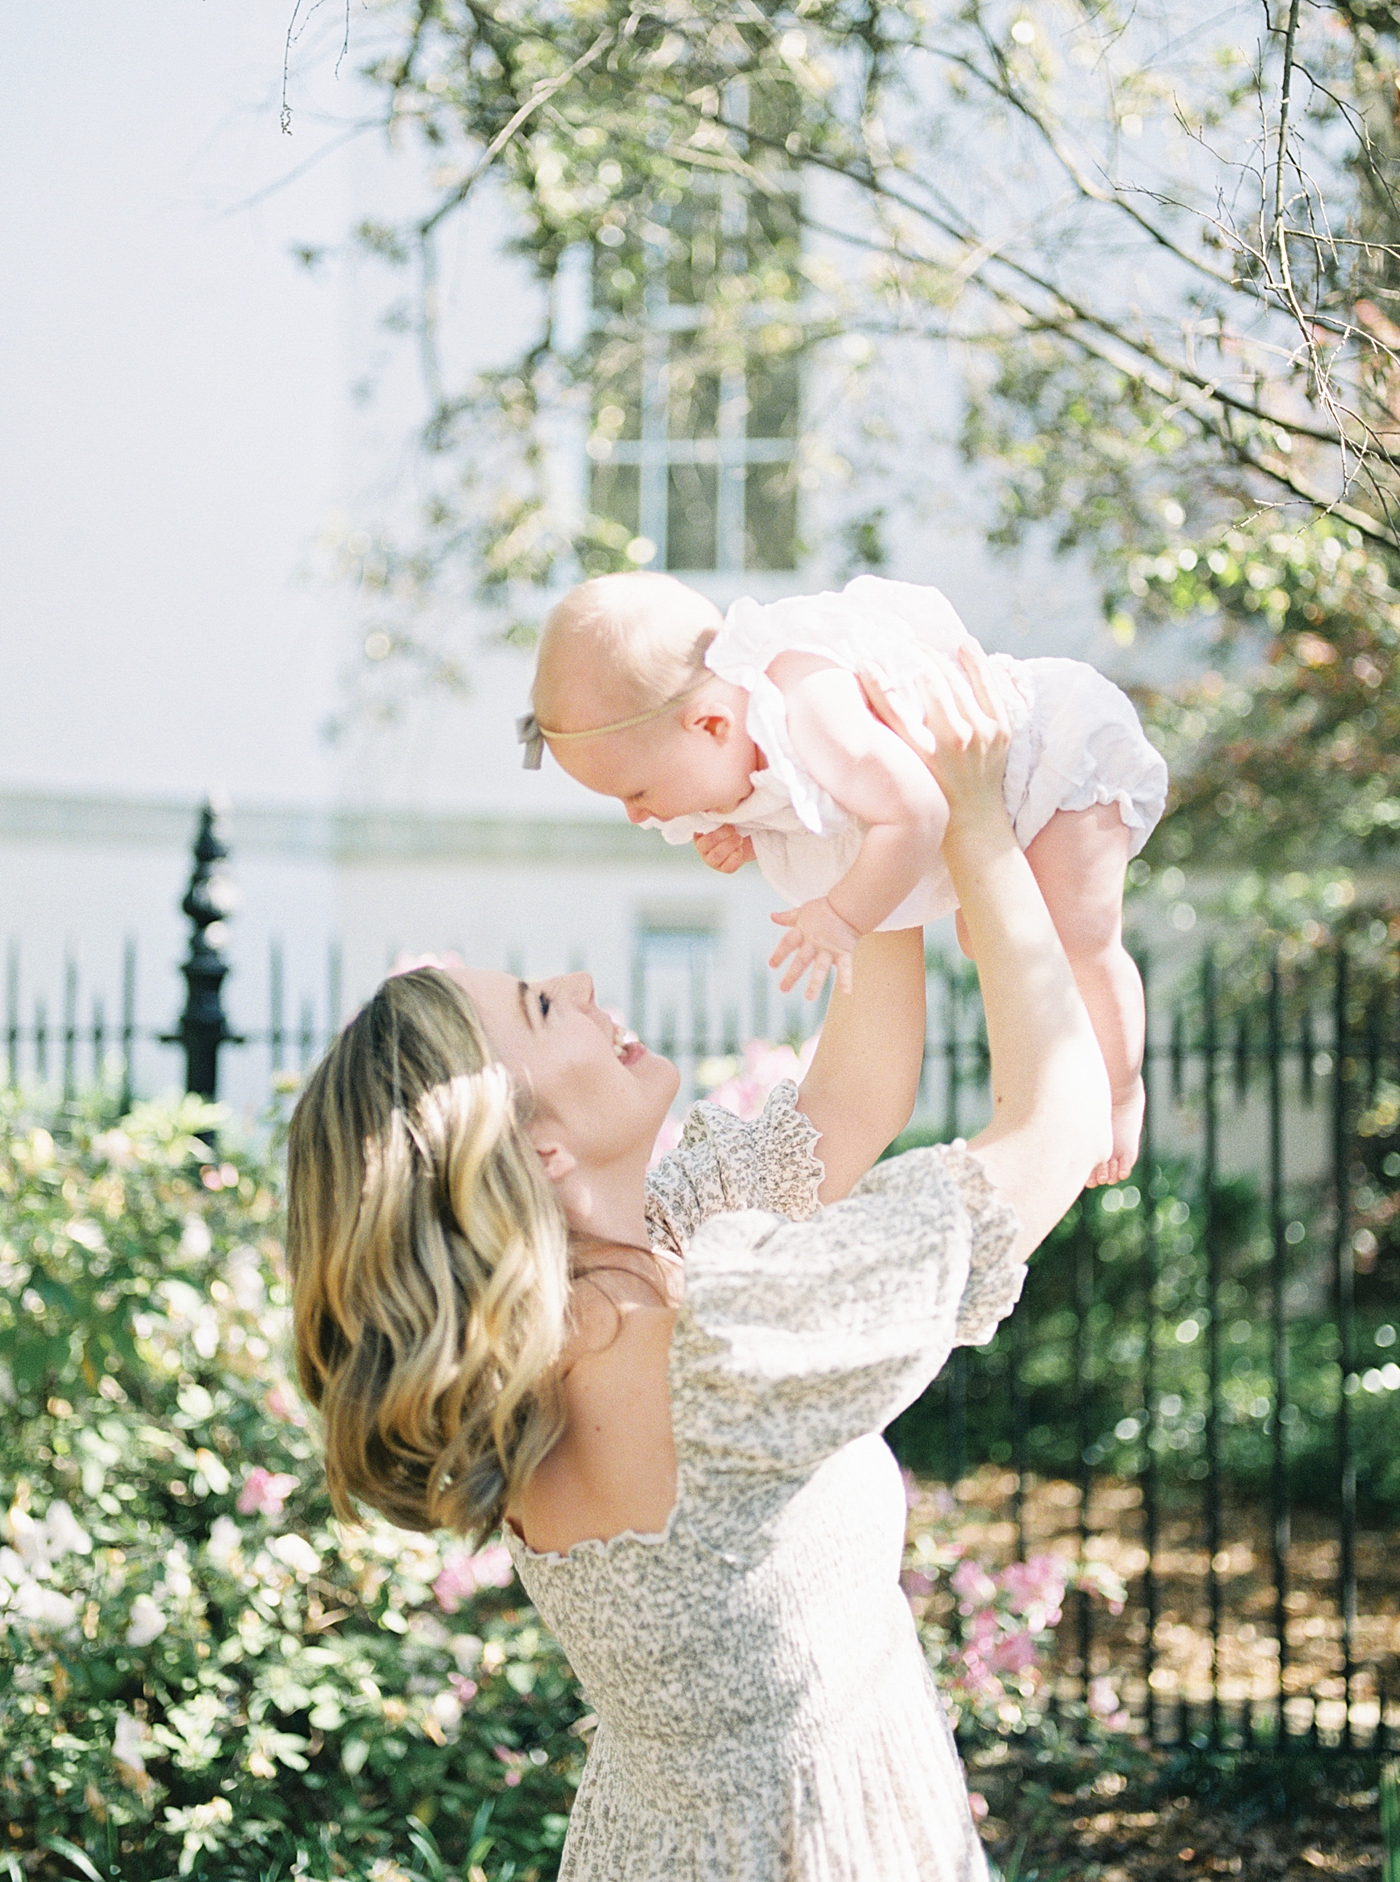 Mom holding her baby girl above her head | Image by Caitlyn Motycka